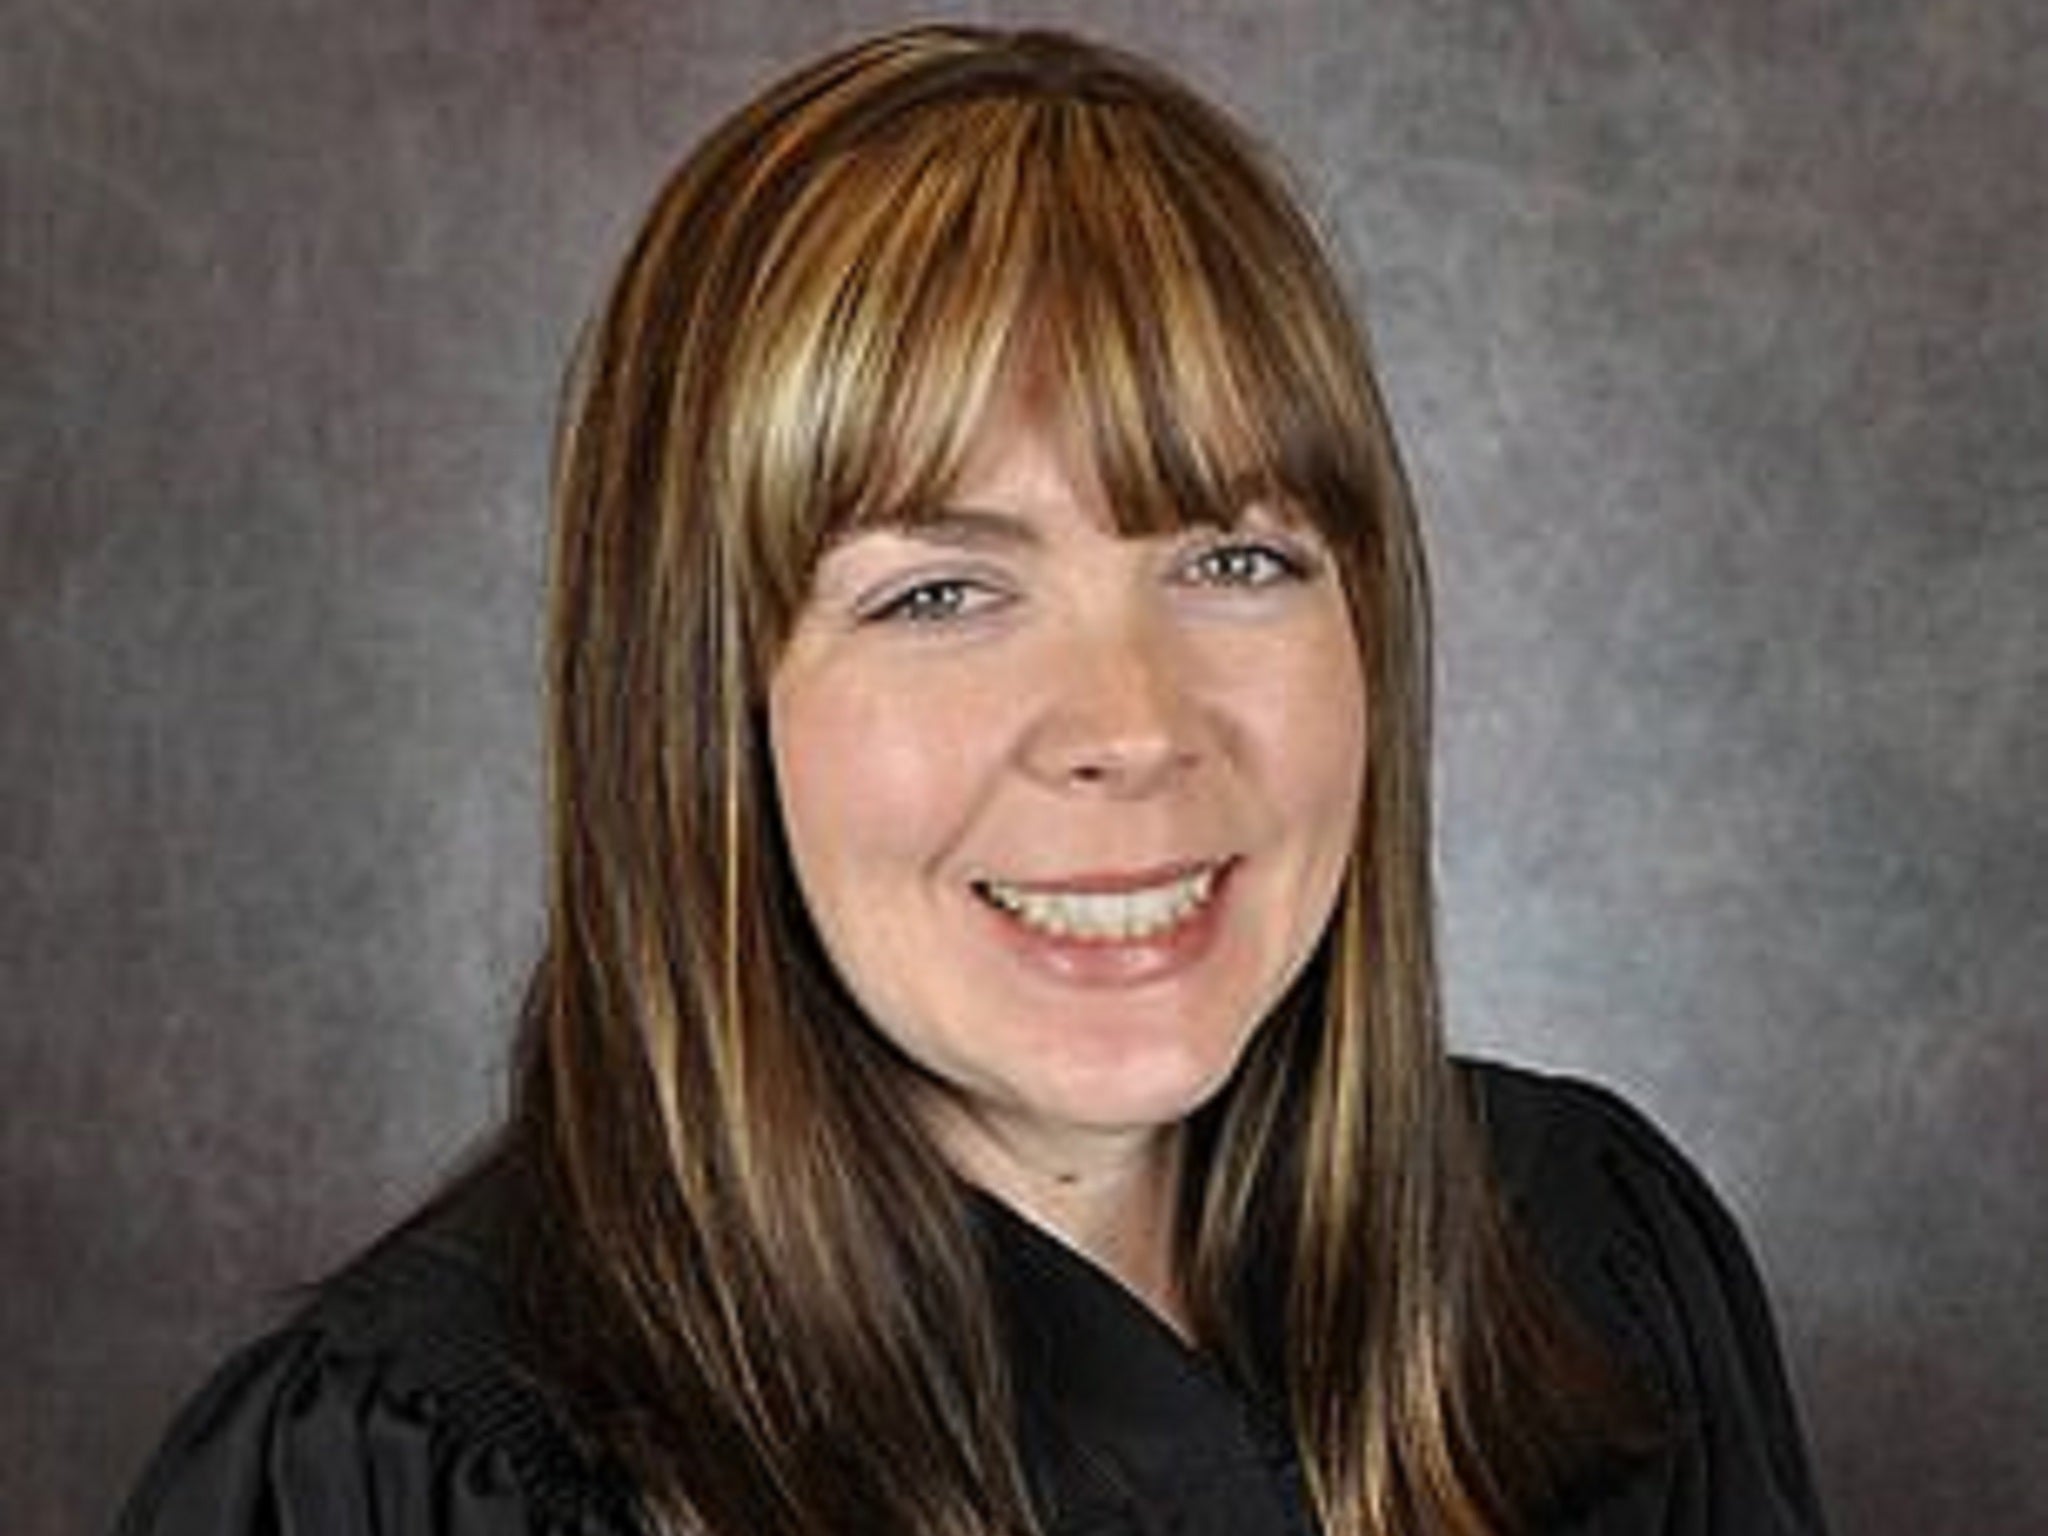 Kentucky family court judge Dawn Gentry has been suspended amid an ethics investigation into her office.